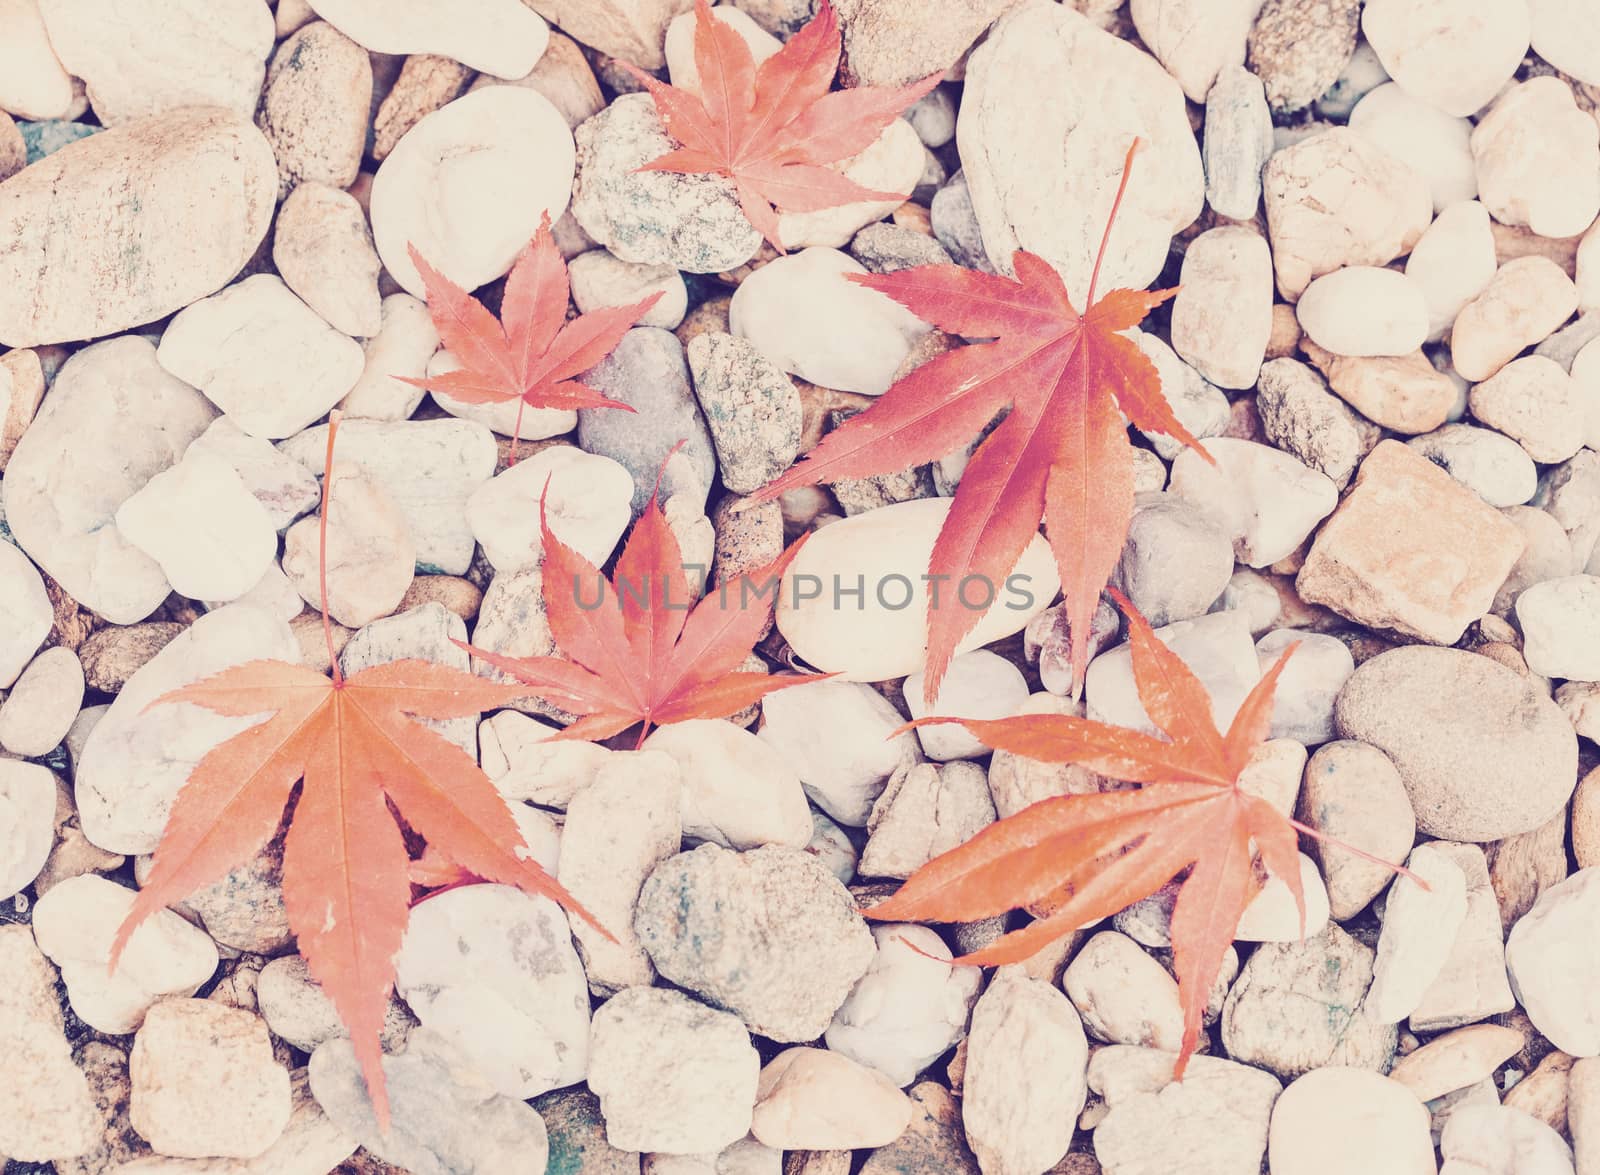 Autumn Leaves over pebbles background by artush